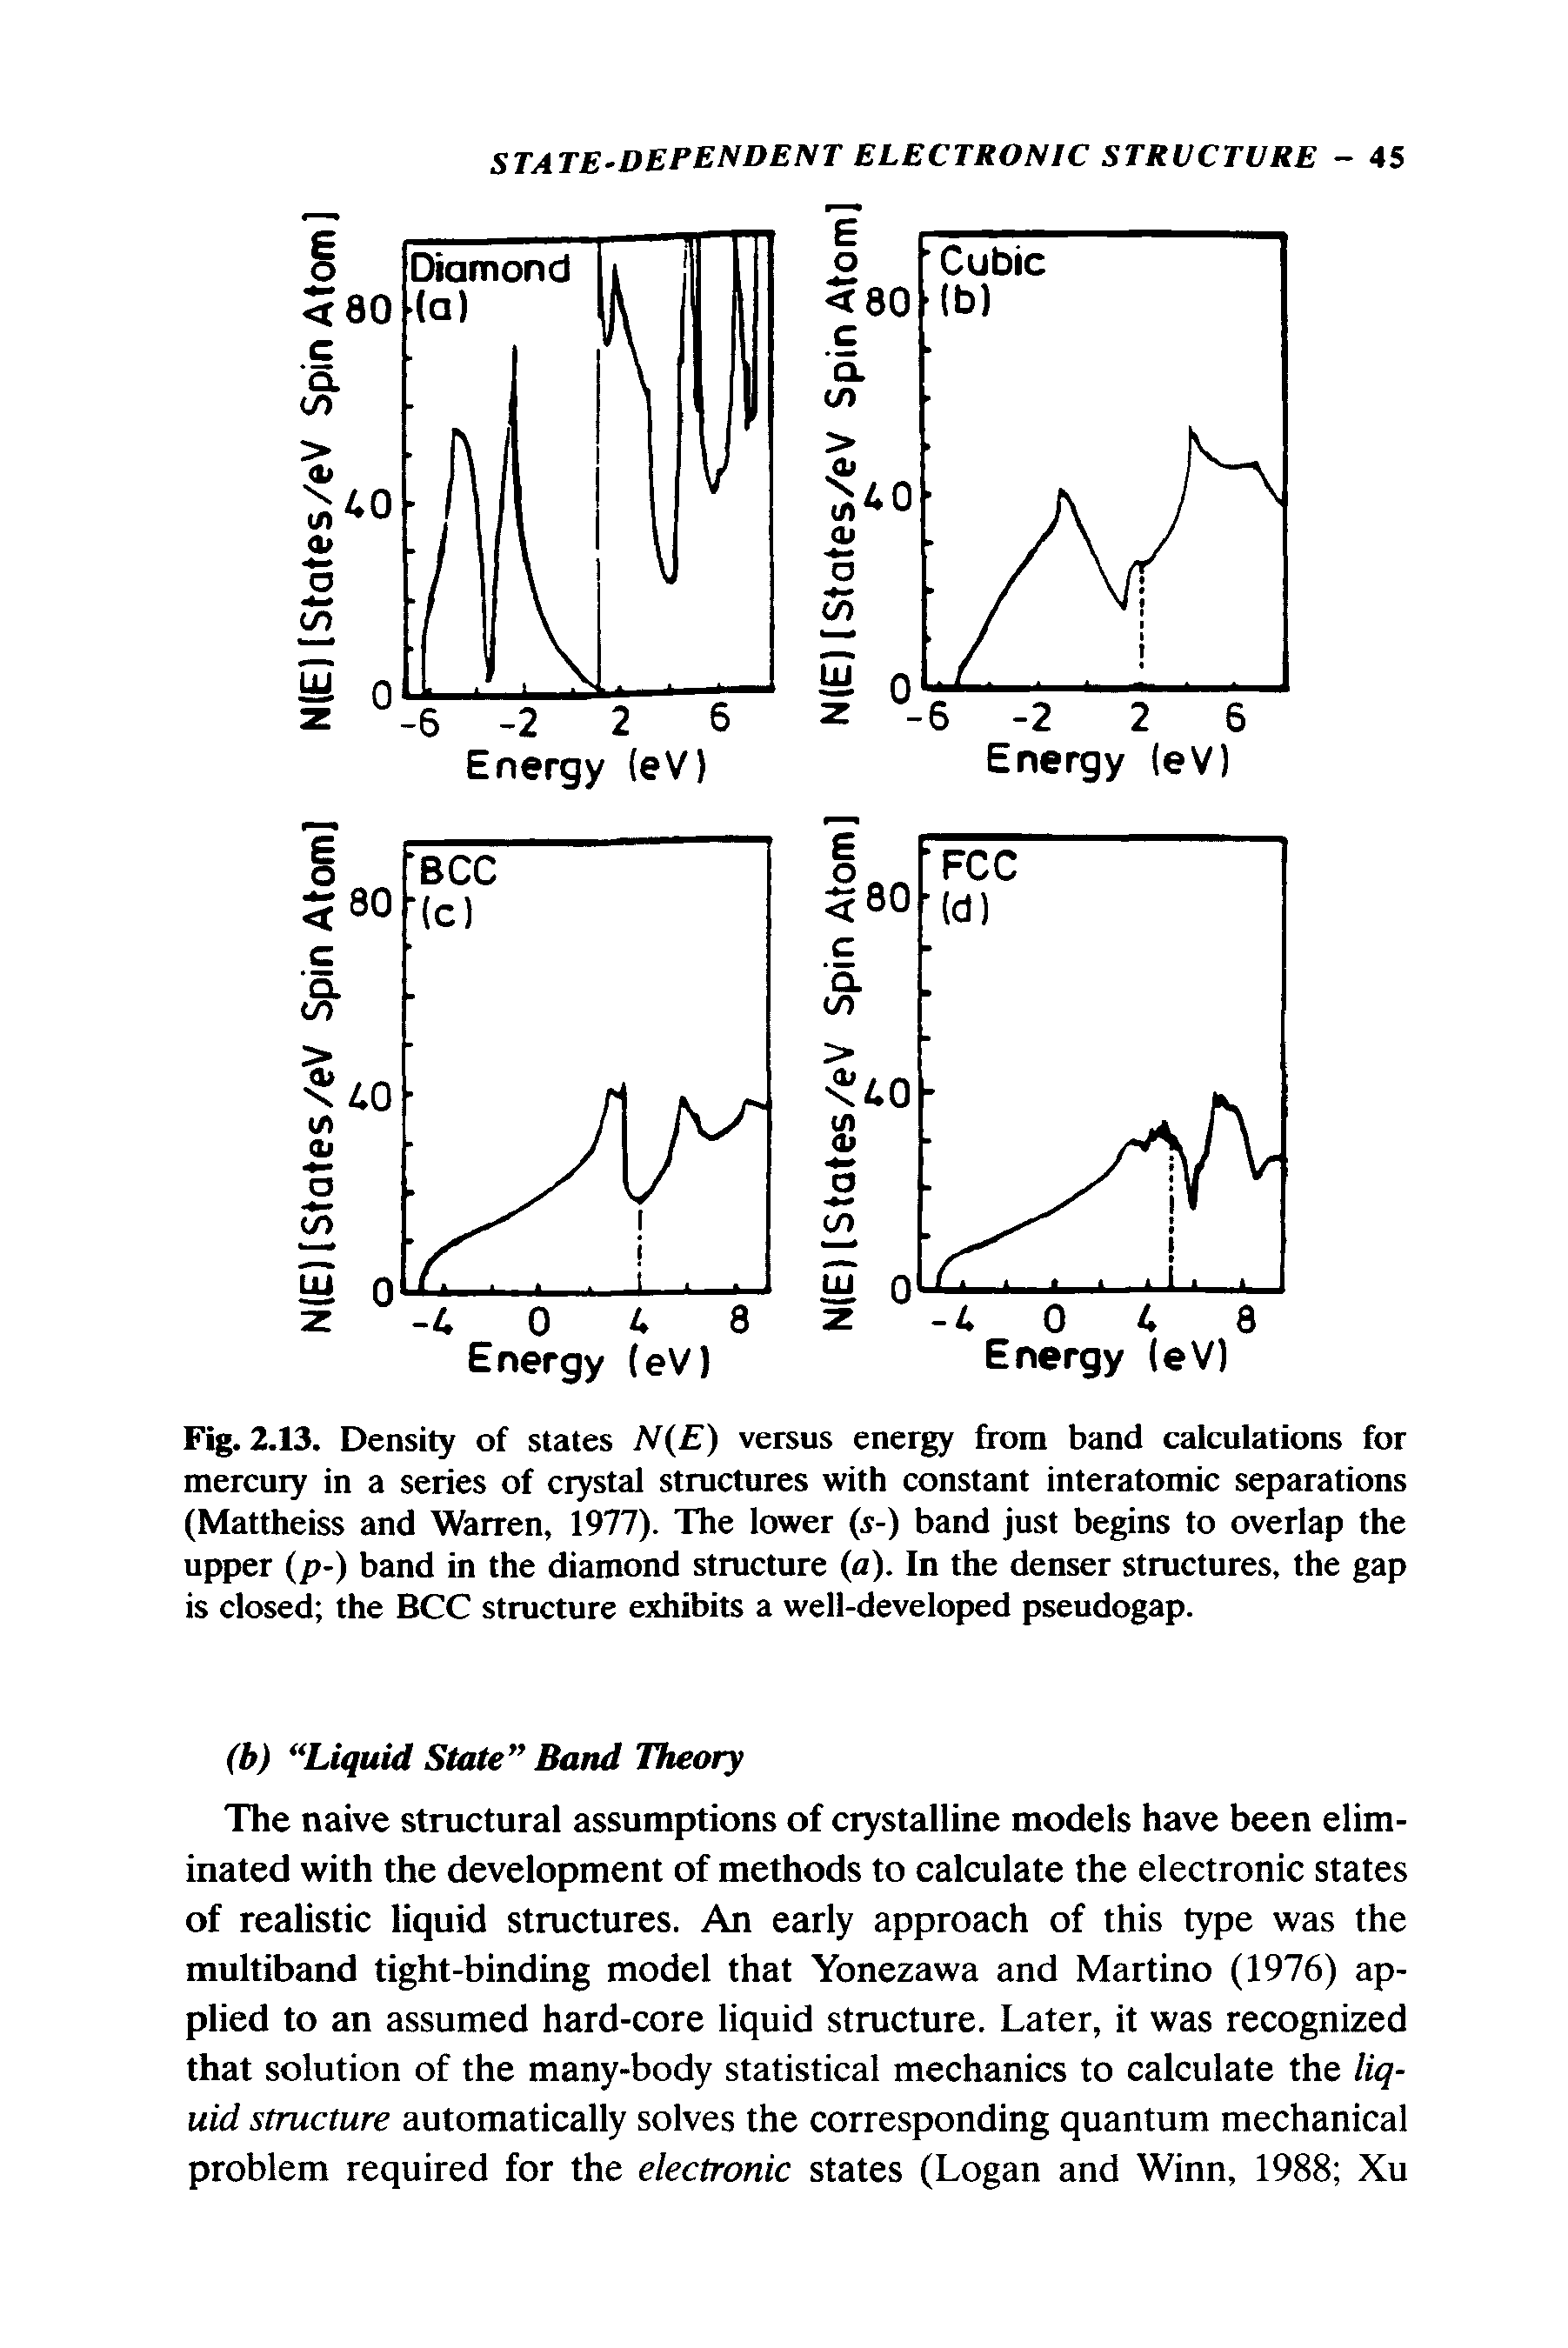 Fig. 2.13. Density of states N E) versus energy from band calculations for mercury in a series of crystal structures with constant interatomic separations (Mattheiss and Warren, 1977). The lower (s-) band just begins to overlap the upper (p-) band in the diamond structure (a). In the denser structures, the gap is closed the BCC structure exhibits a well-developed pseudogap.